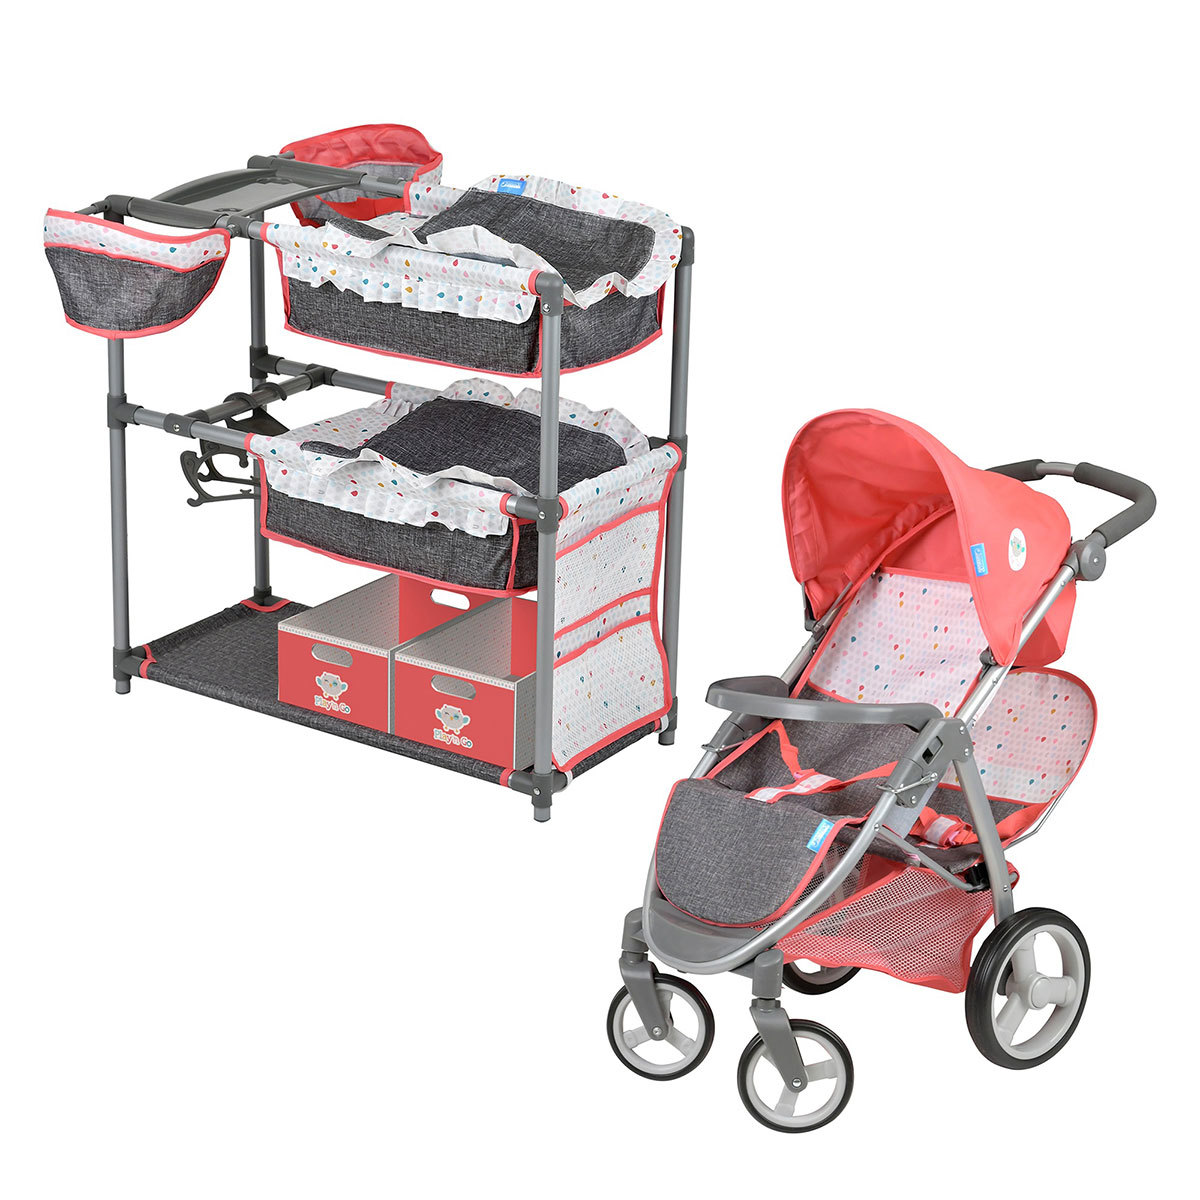 Twin Doll Play Set with Twin Doll Stroller and Twin Doll Play Centre